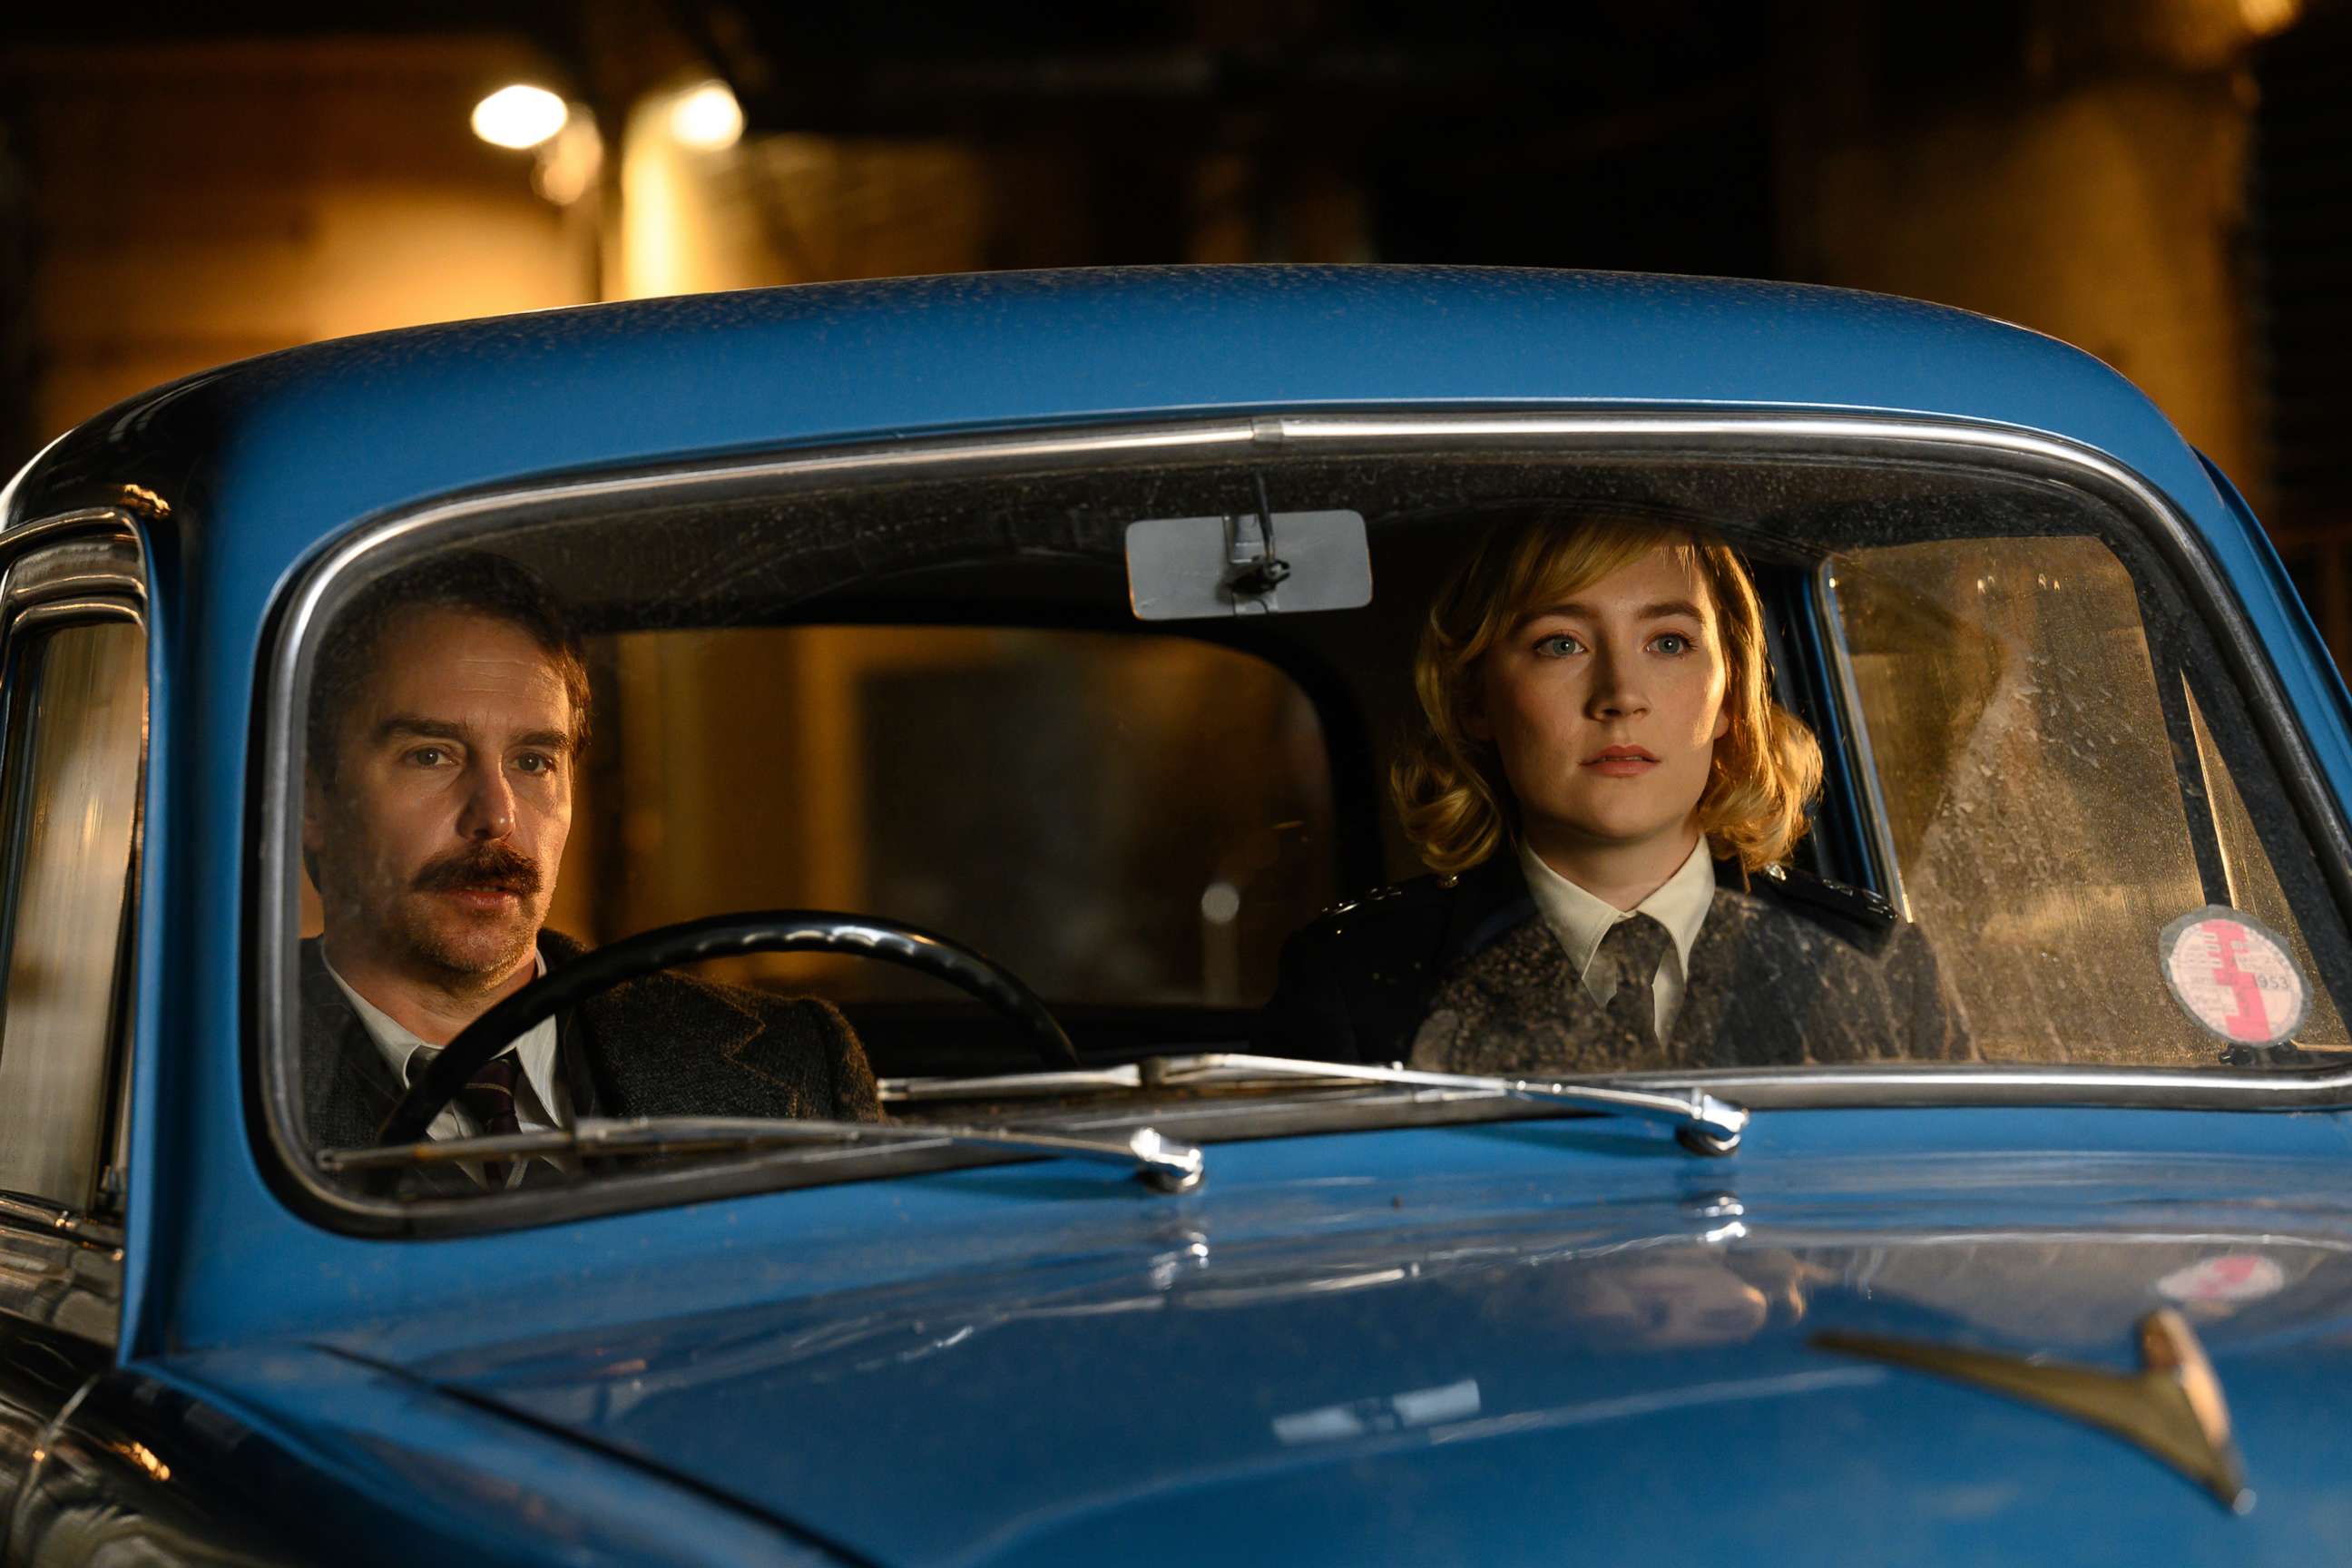 PHOTO: Sam Rockwell and Saoirse Ronan in the film "See How They Run".